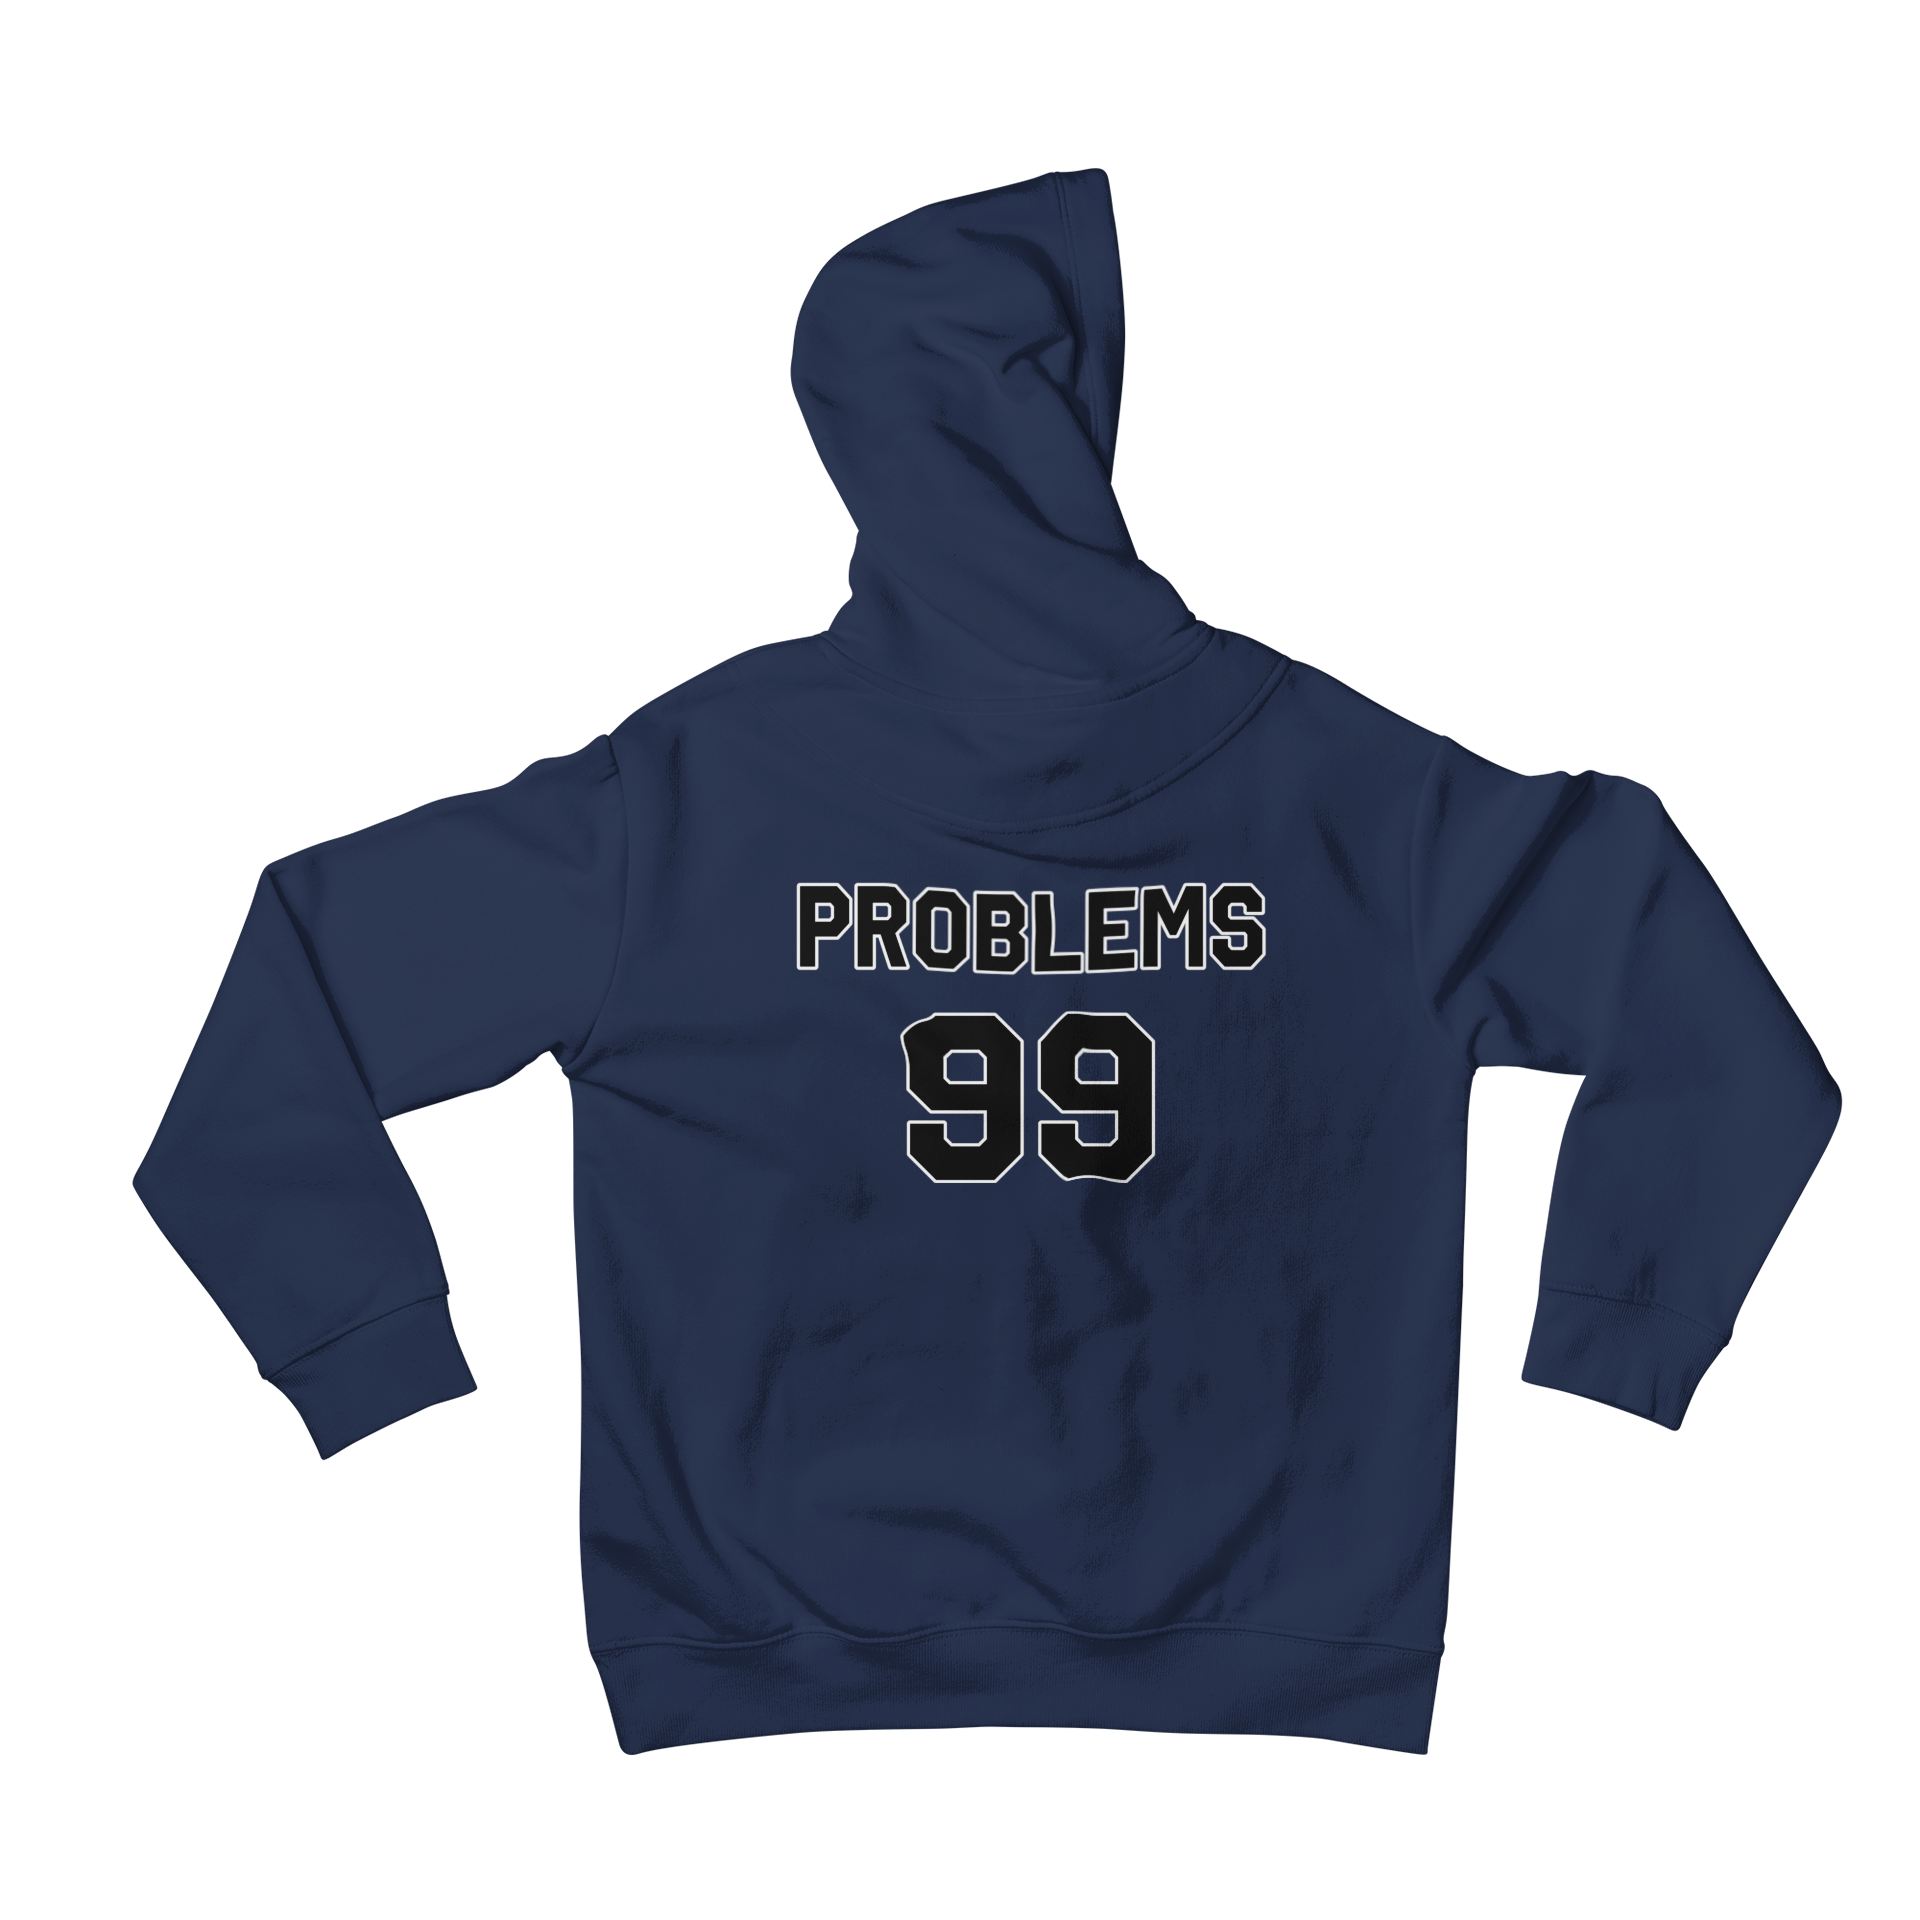 This matching hoodie features the iconic slogan "99 Problems," making it a must-have for those who love to make a statement. With its bold design and comfortable fit, it's the perfect addition to any casual wardrobe. Embrace your edgy side and conquer any challenge with this eye-catching hoodie.